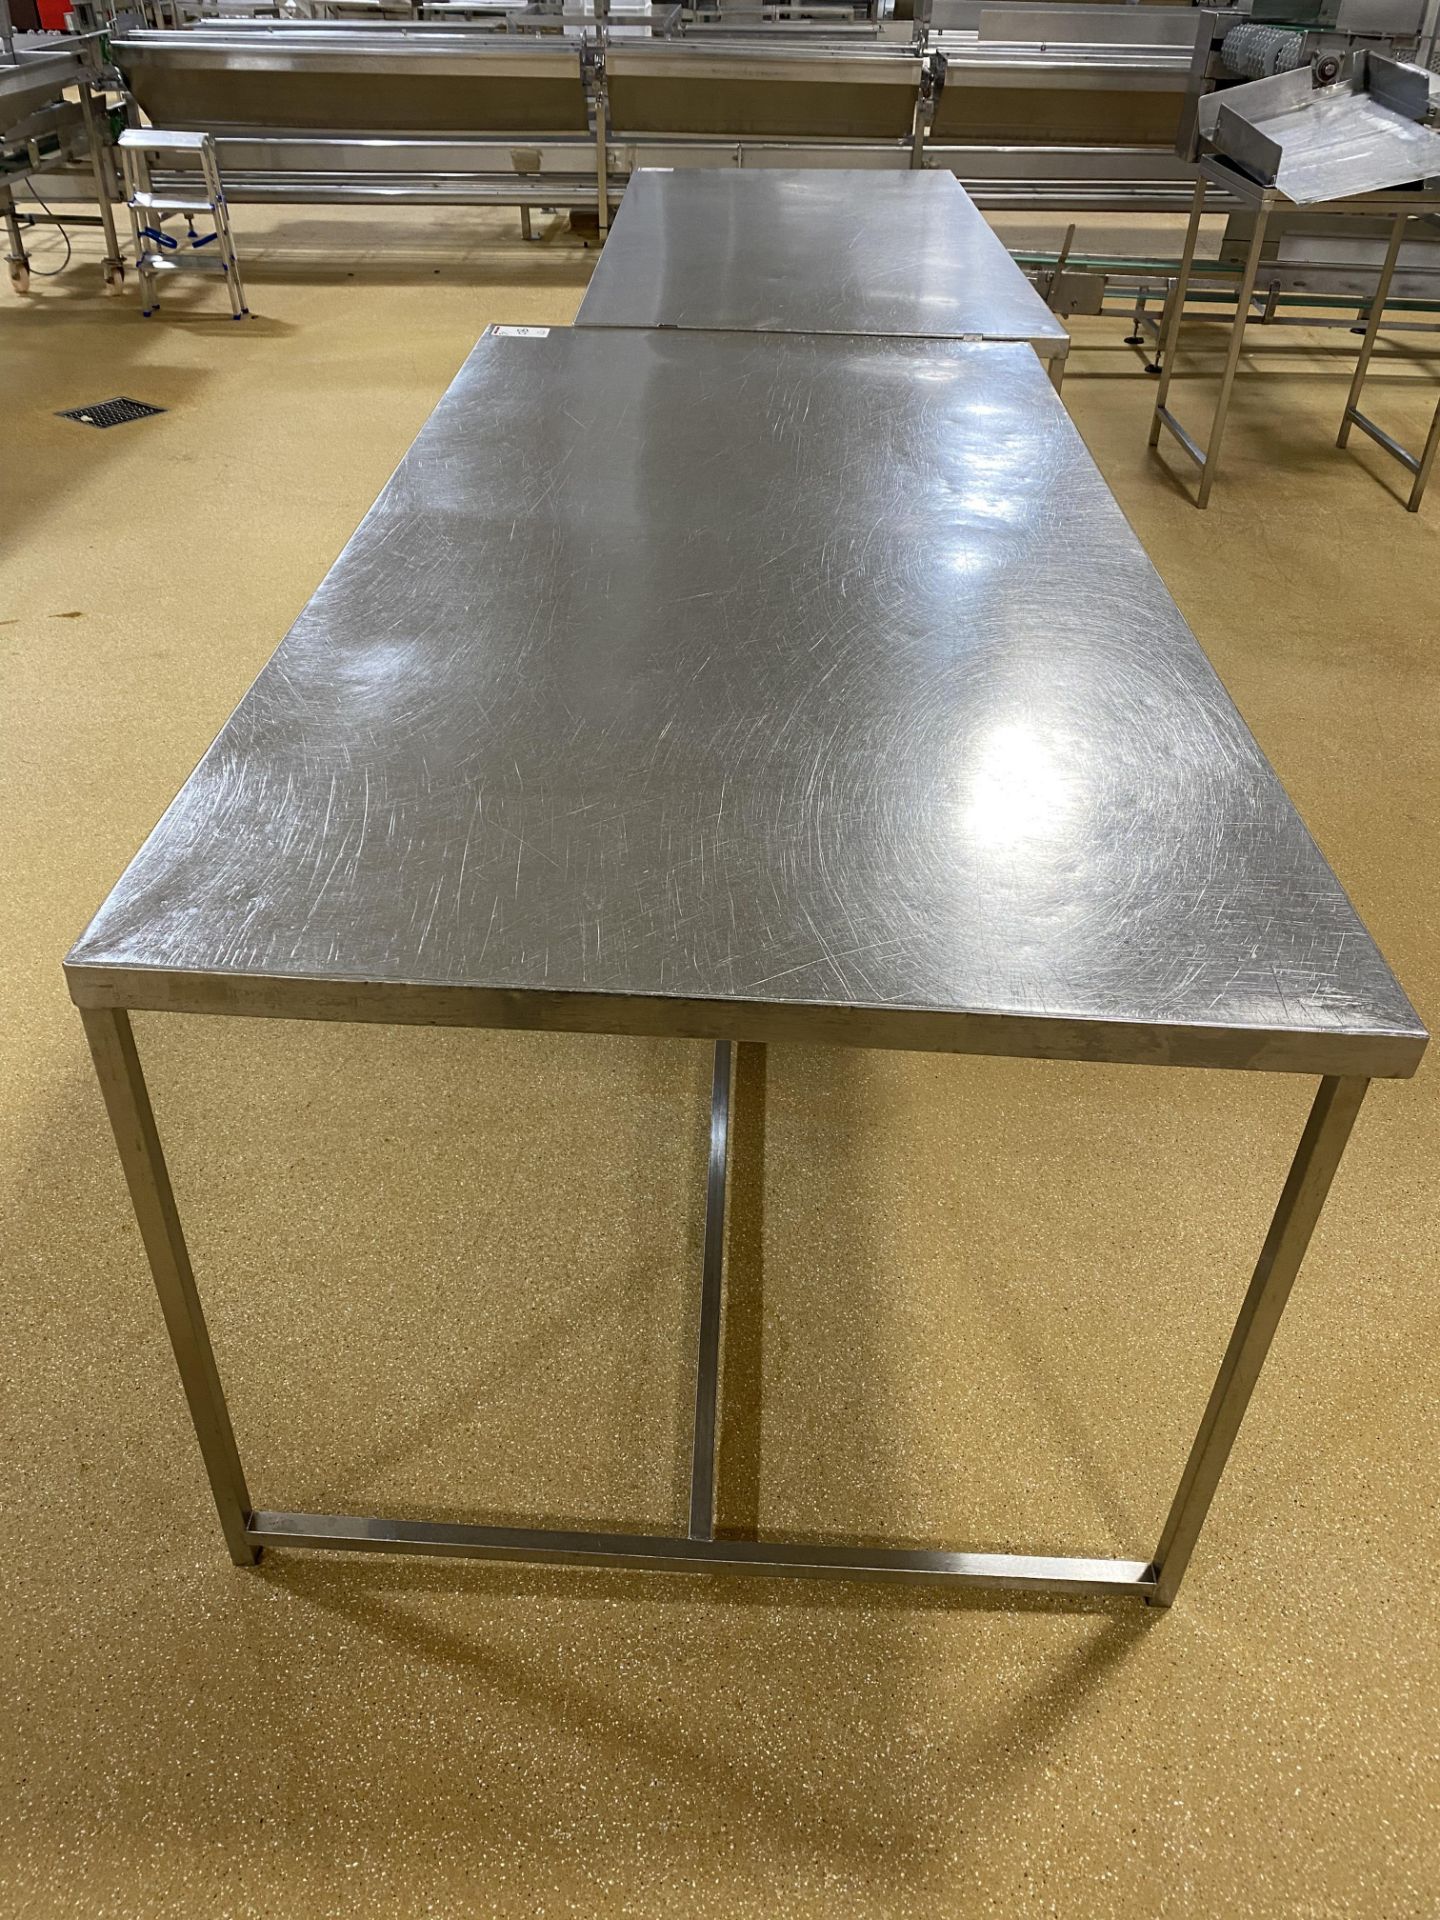 2 Stainless steel preparation tables, Length 193cm - Image 4 of 4